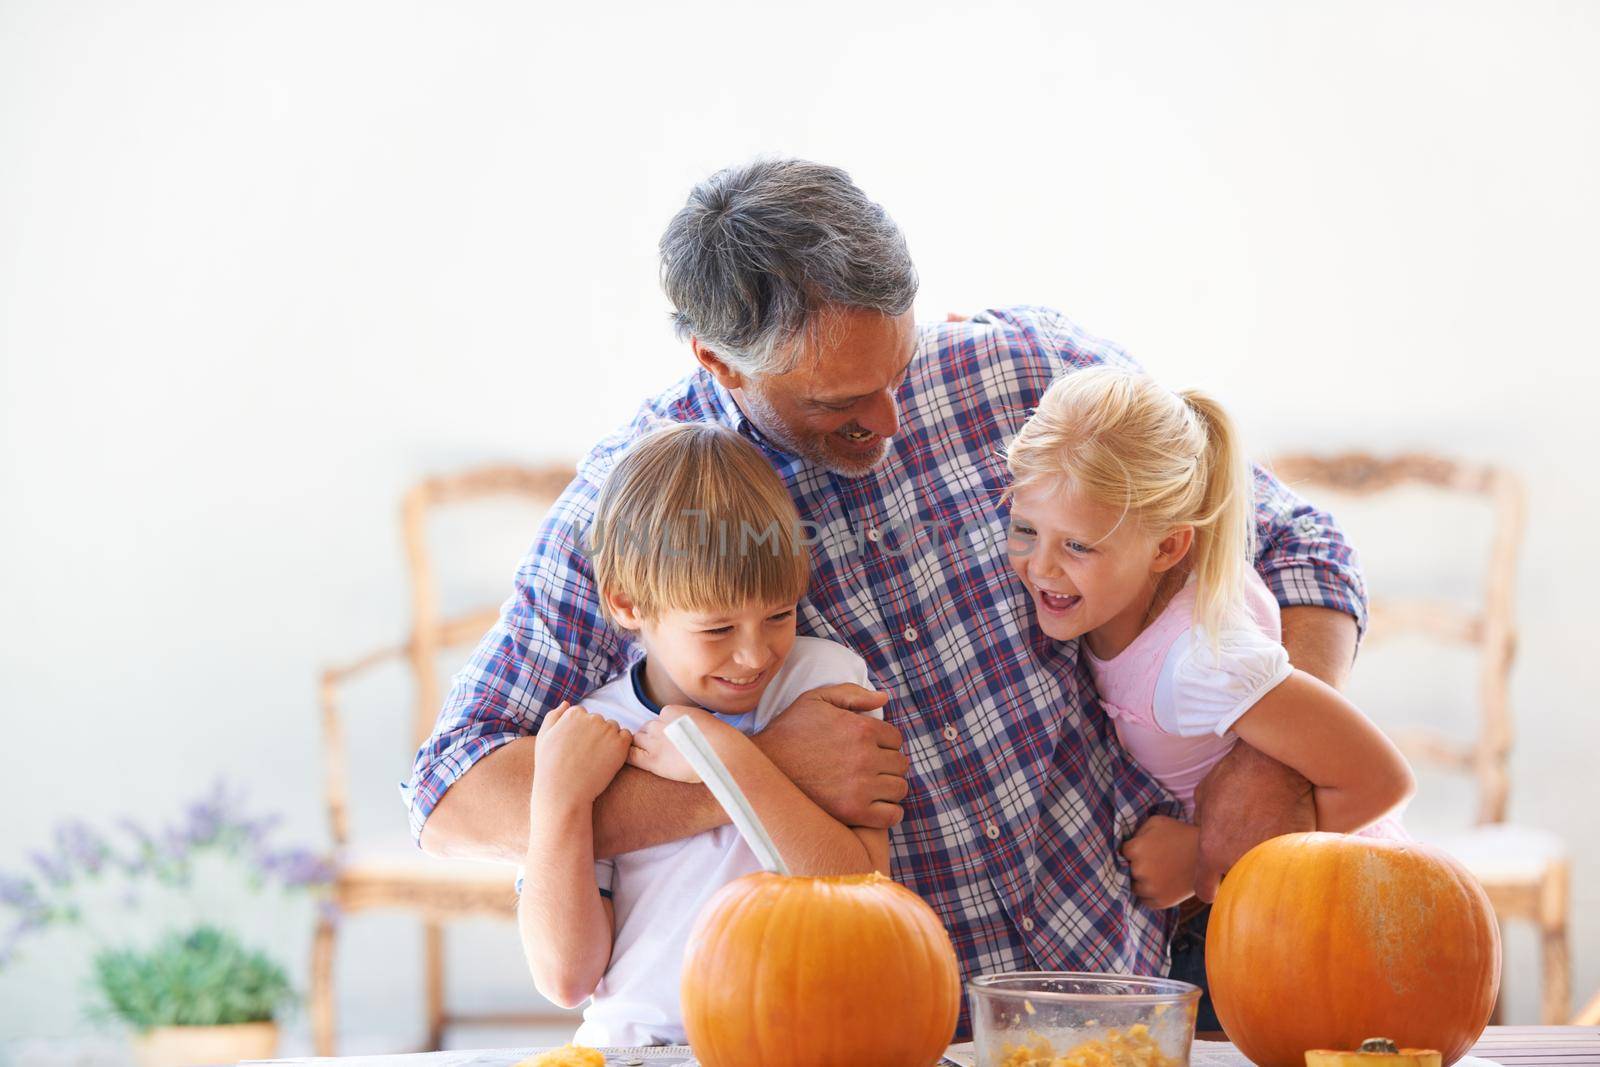 He loves spending time with his kids. A father embracing his son and daughter while hollowing out pumpkins for halloween. by YuriArcurs